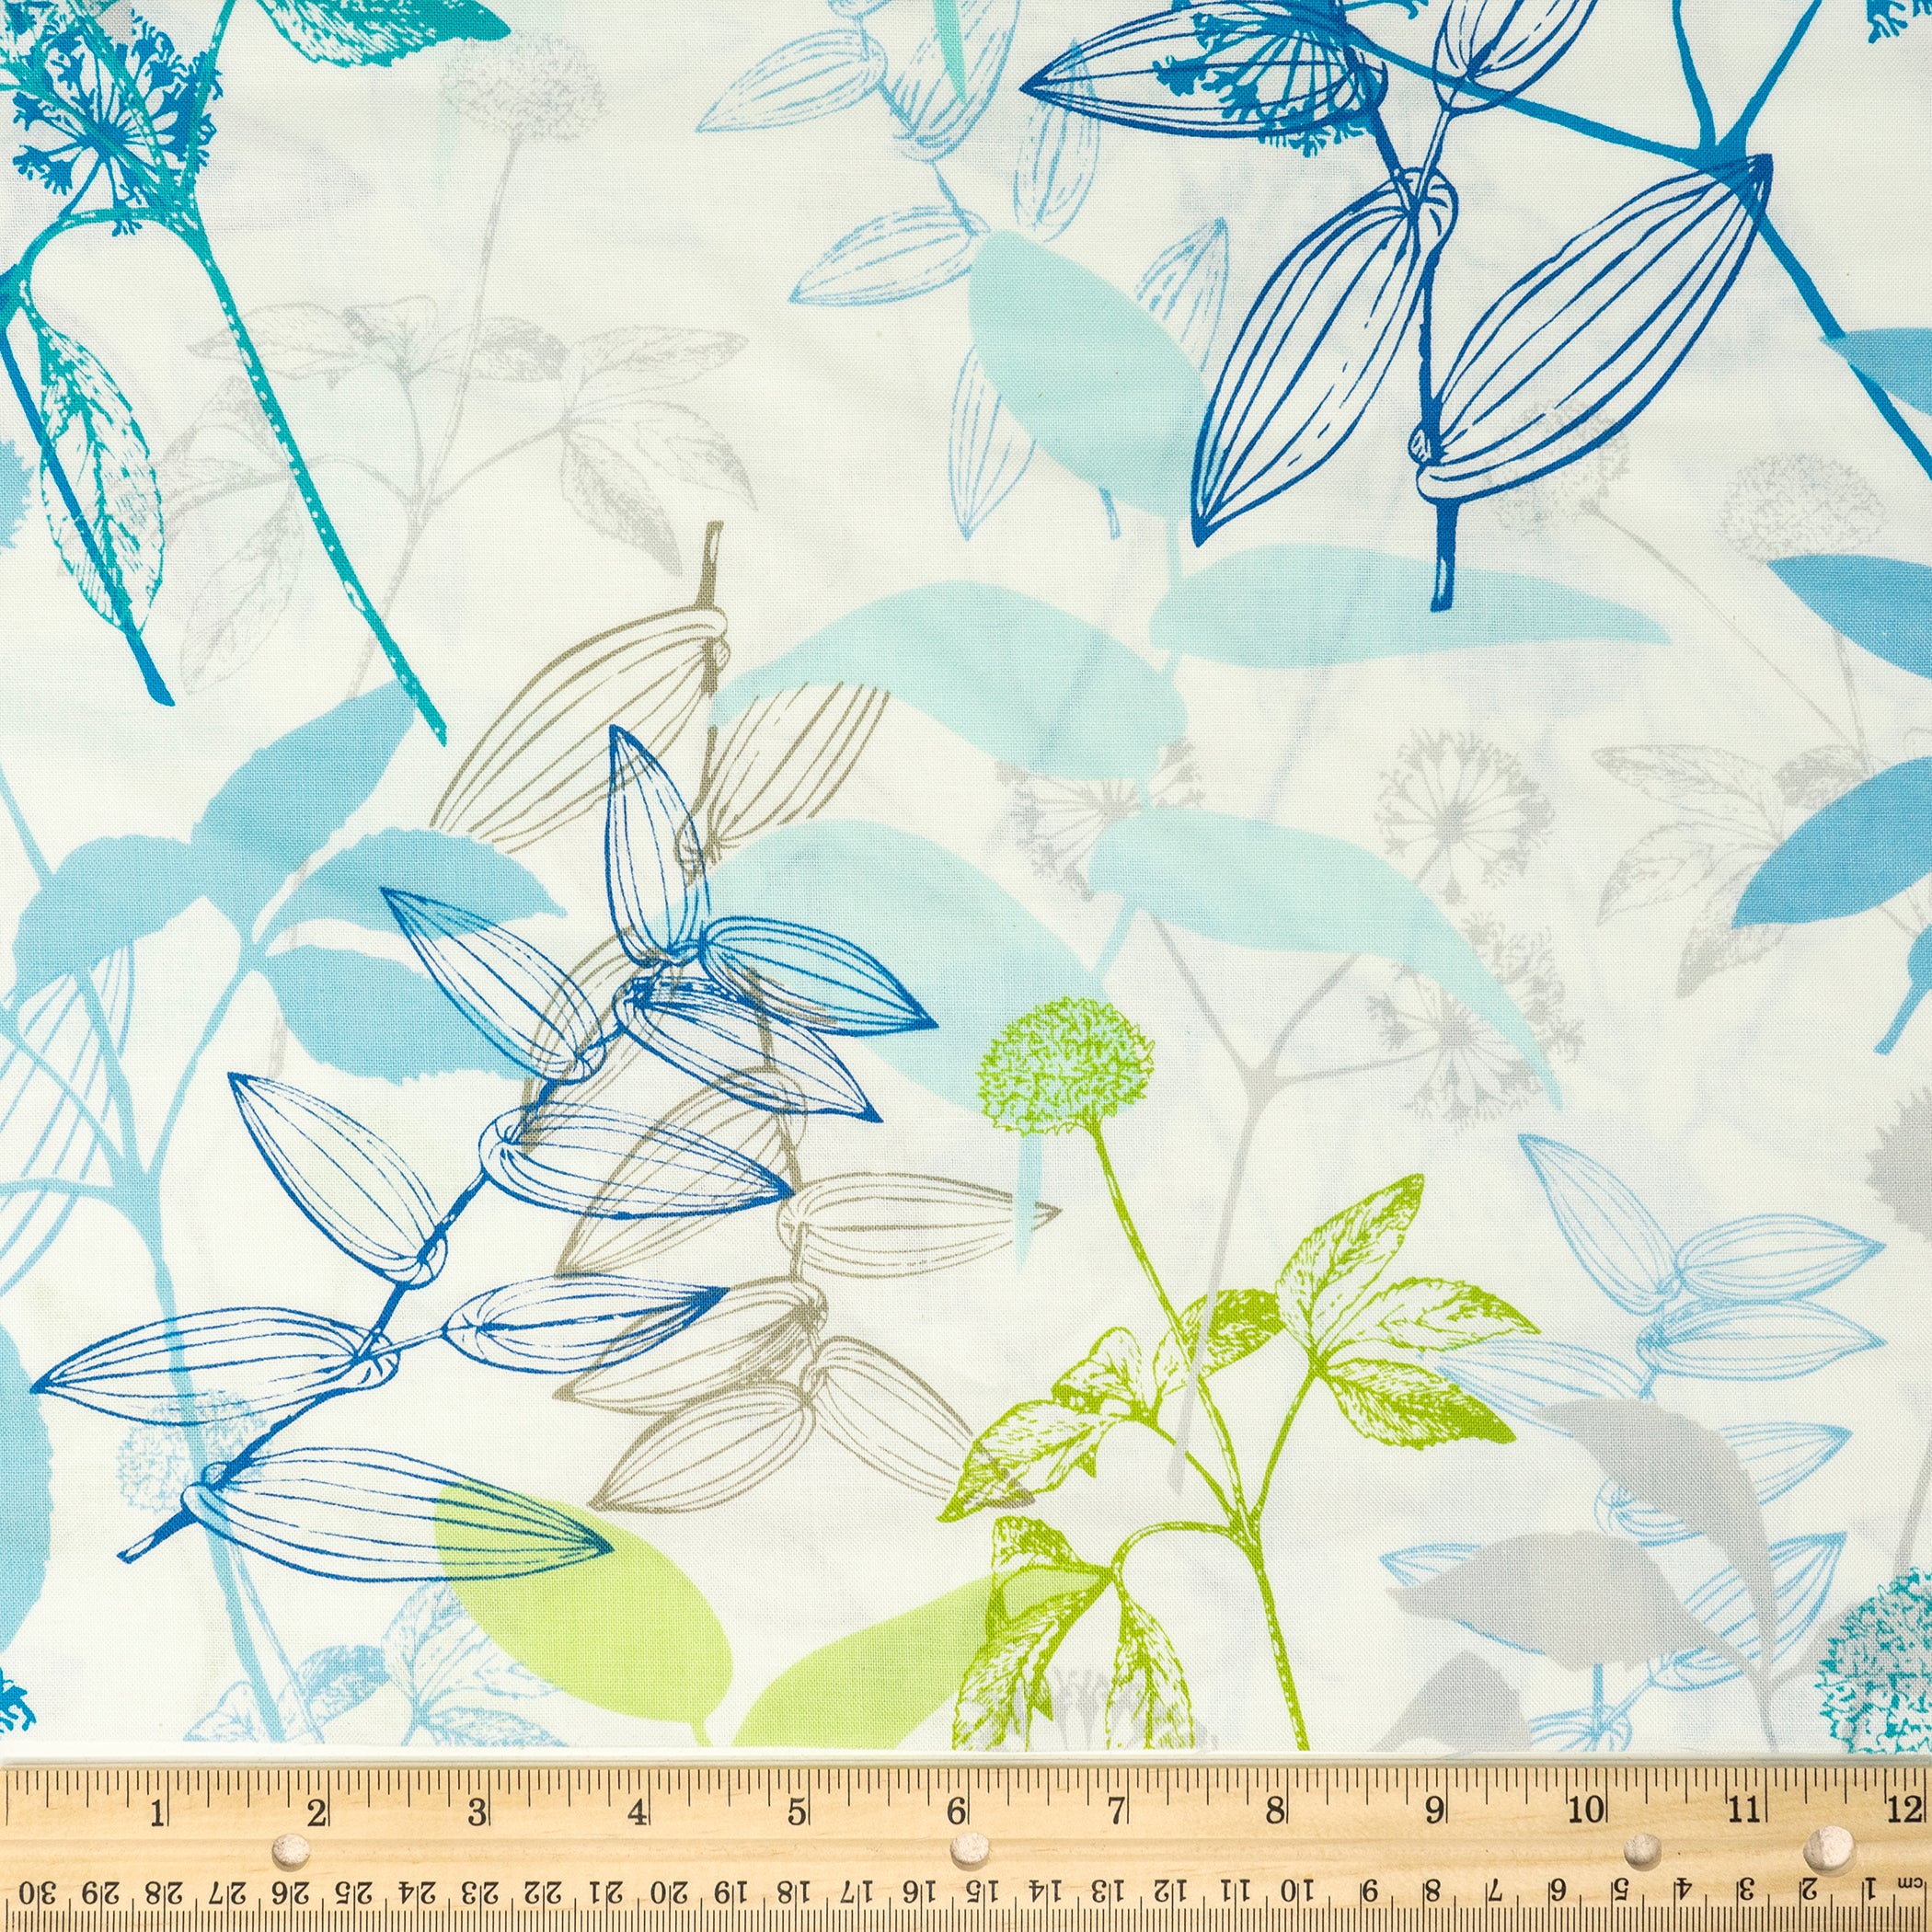 Waverly Inspirations Cotton 44" Botanical Aqua Color Sewing Fabric by the Yard